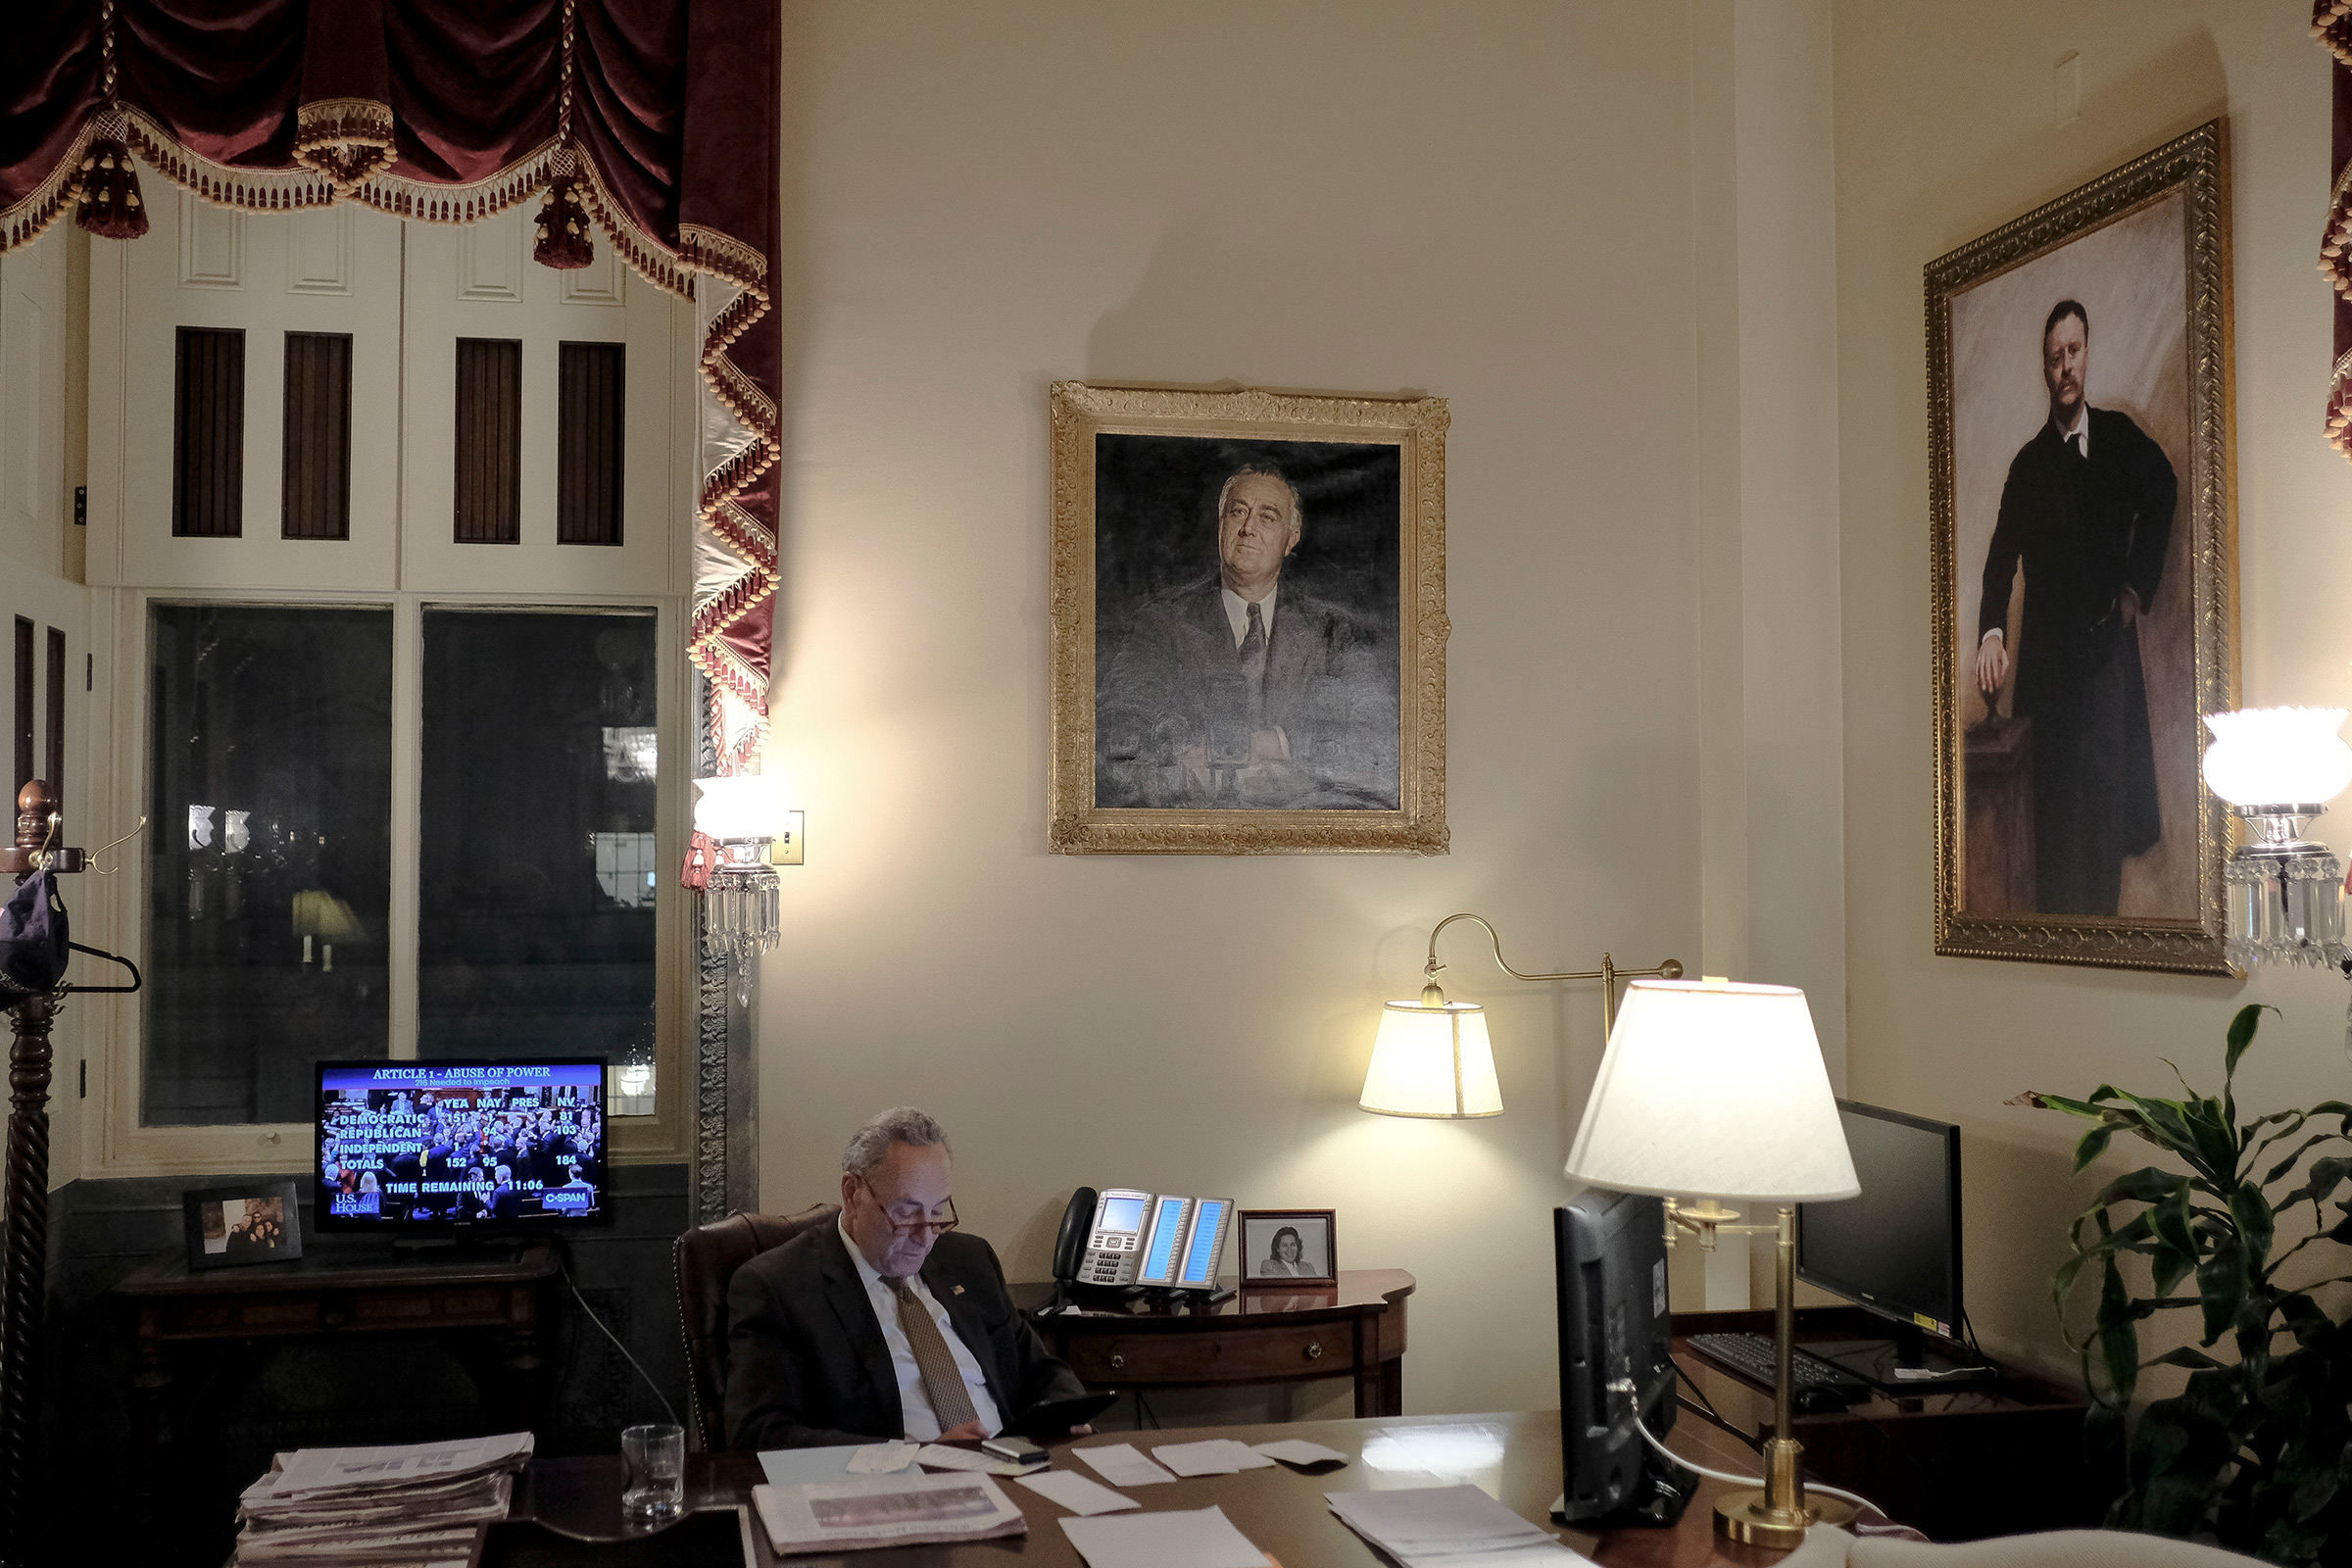 Senate Minority Leader Chuck Schumer (D-N.Y.) watches the House vote on the articles of impeachment in his office at the Capitol in Washington, D.C., on Dec. 18, 2019. (Gabriella Demczuk for TIME)